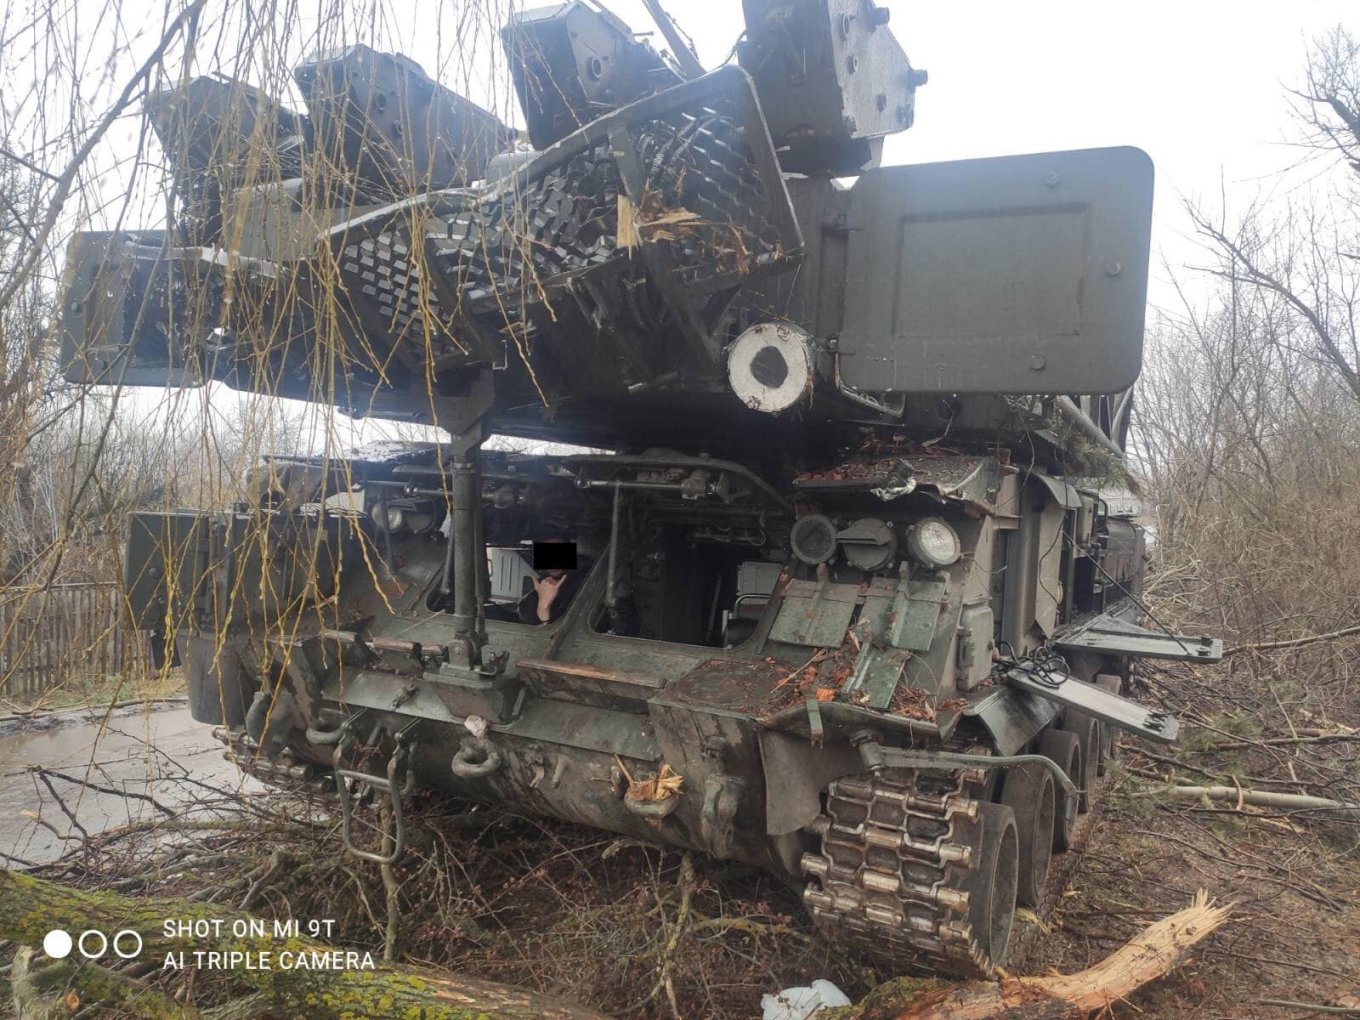 IUkraine’s Special Operations Forces seized Russian Buk SAM system, ammo stock, Defense Express